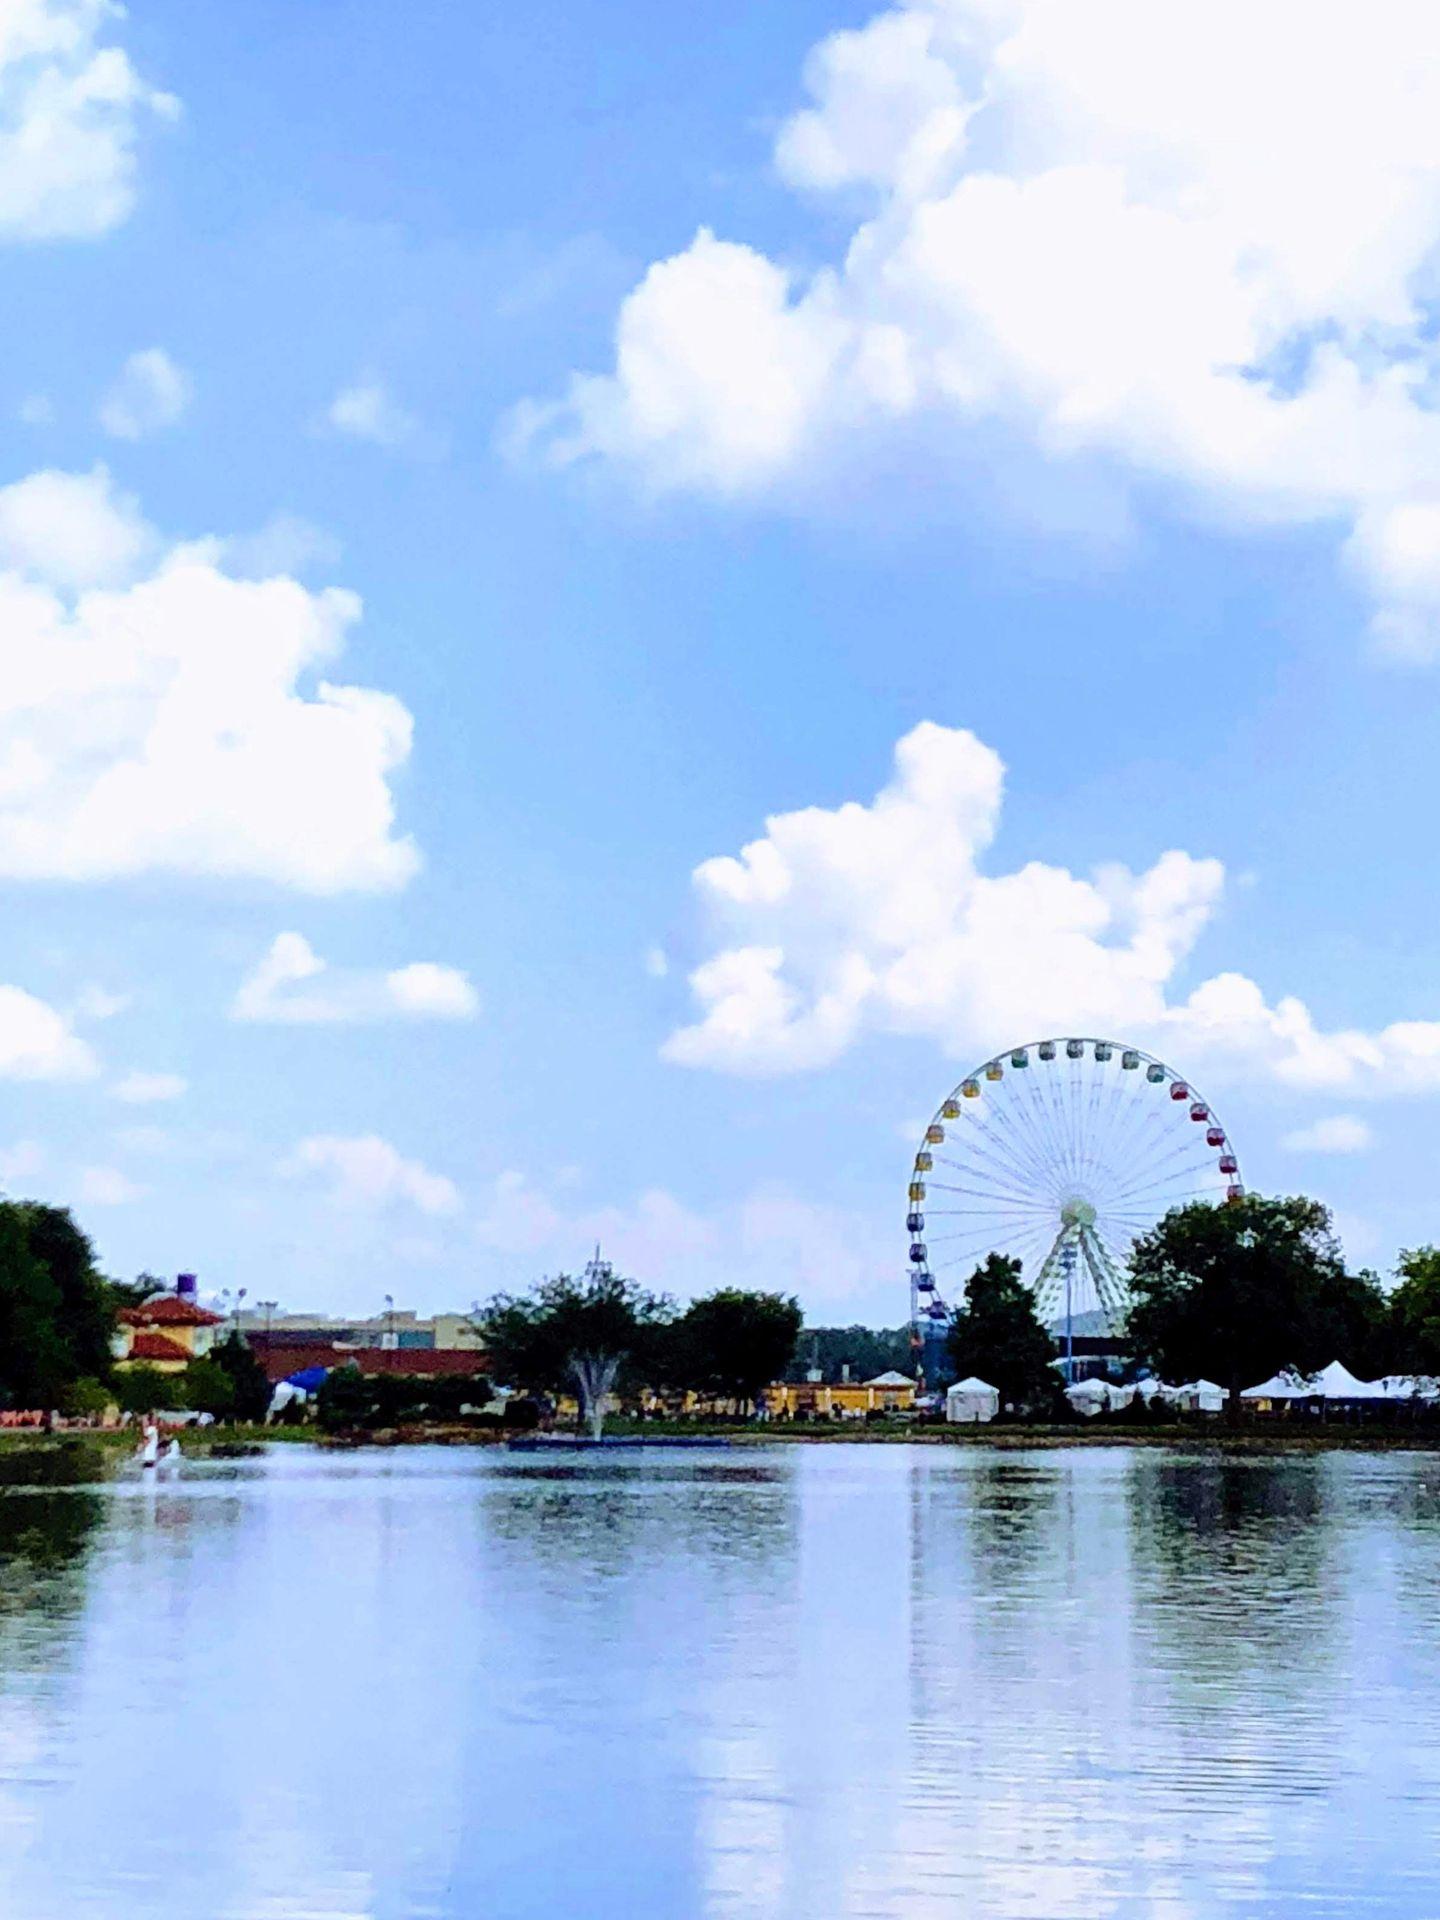 A lake with a ferris wheel in the background at Coney Island.